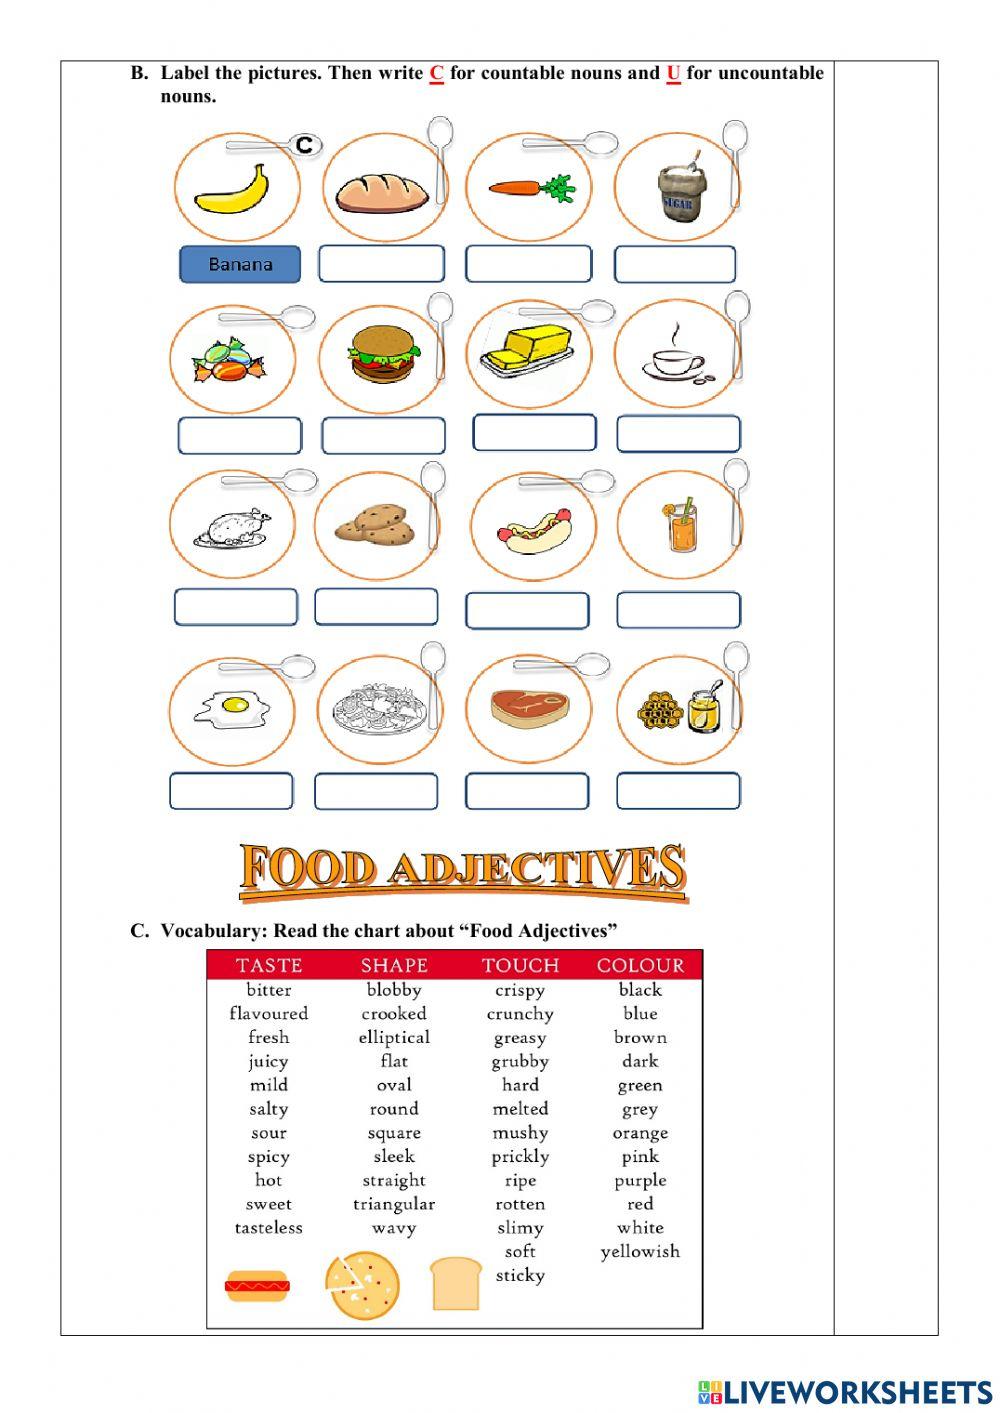 Ejercicios Online-10th EGB- Countable and Uncountable nouns - Adjectives